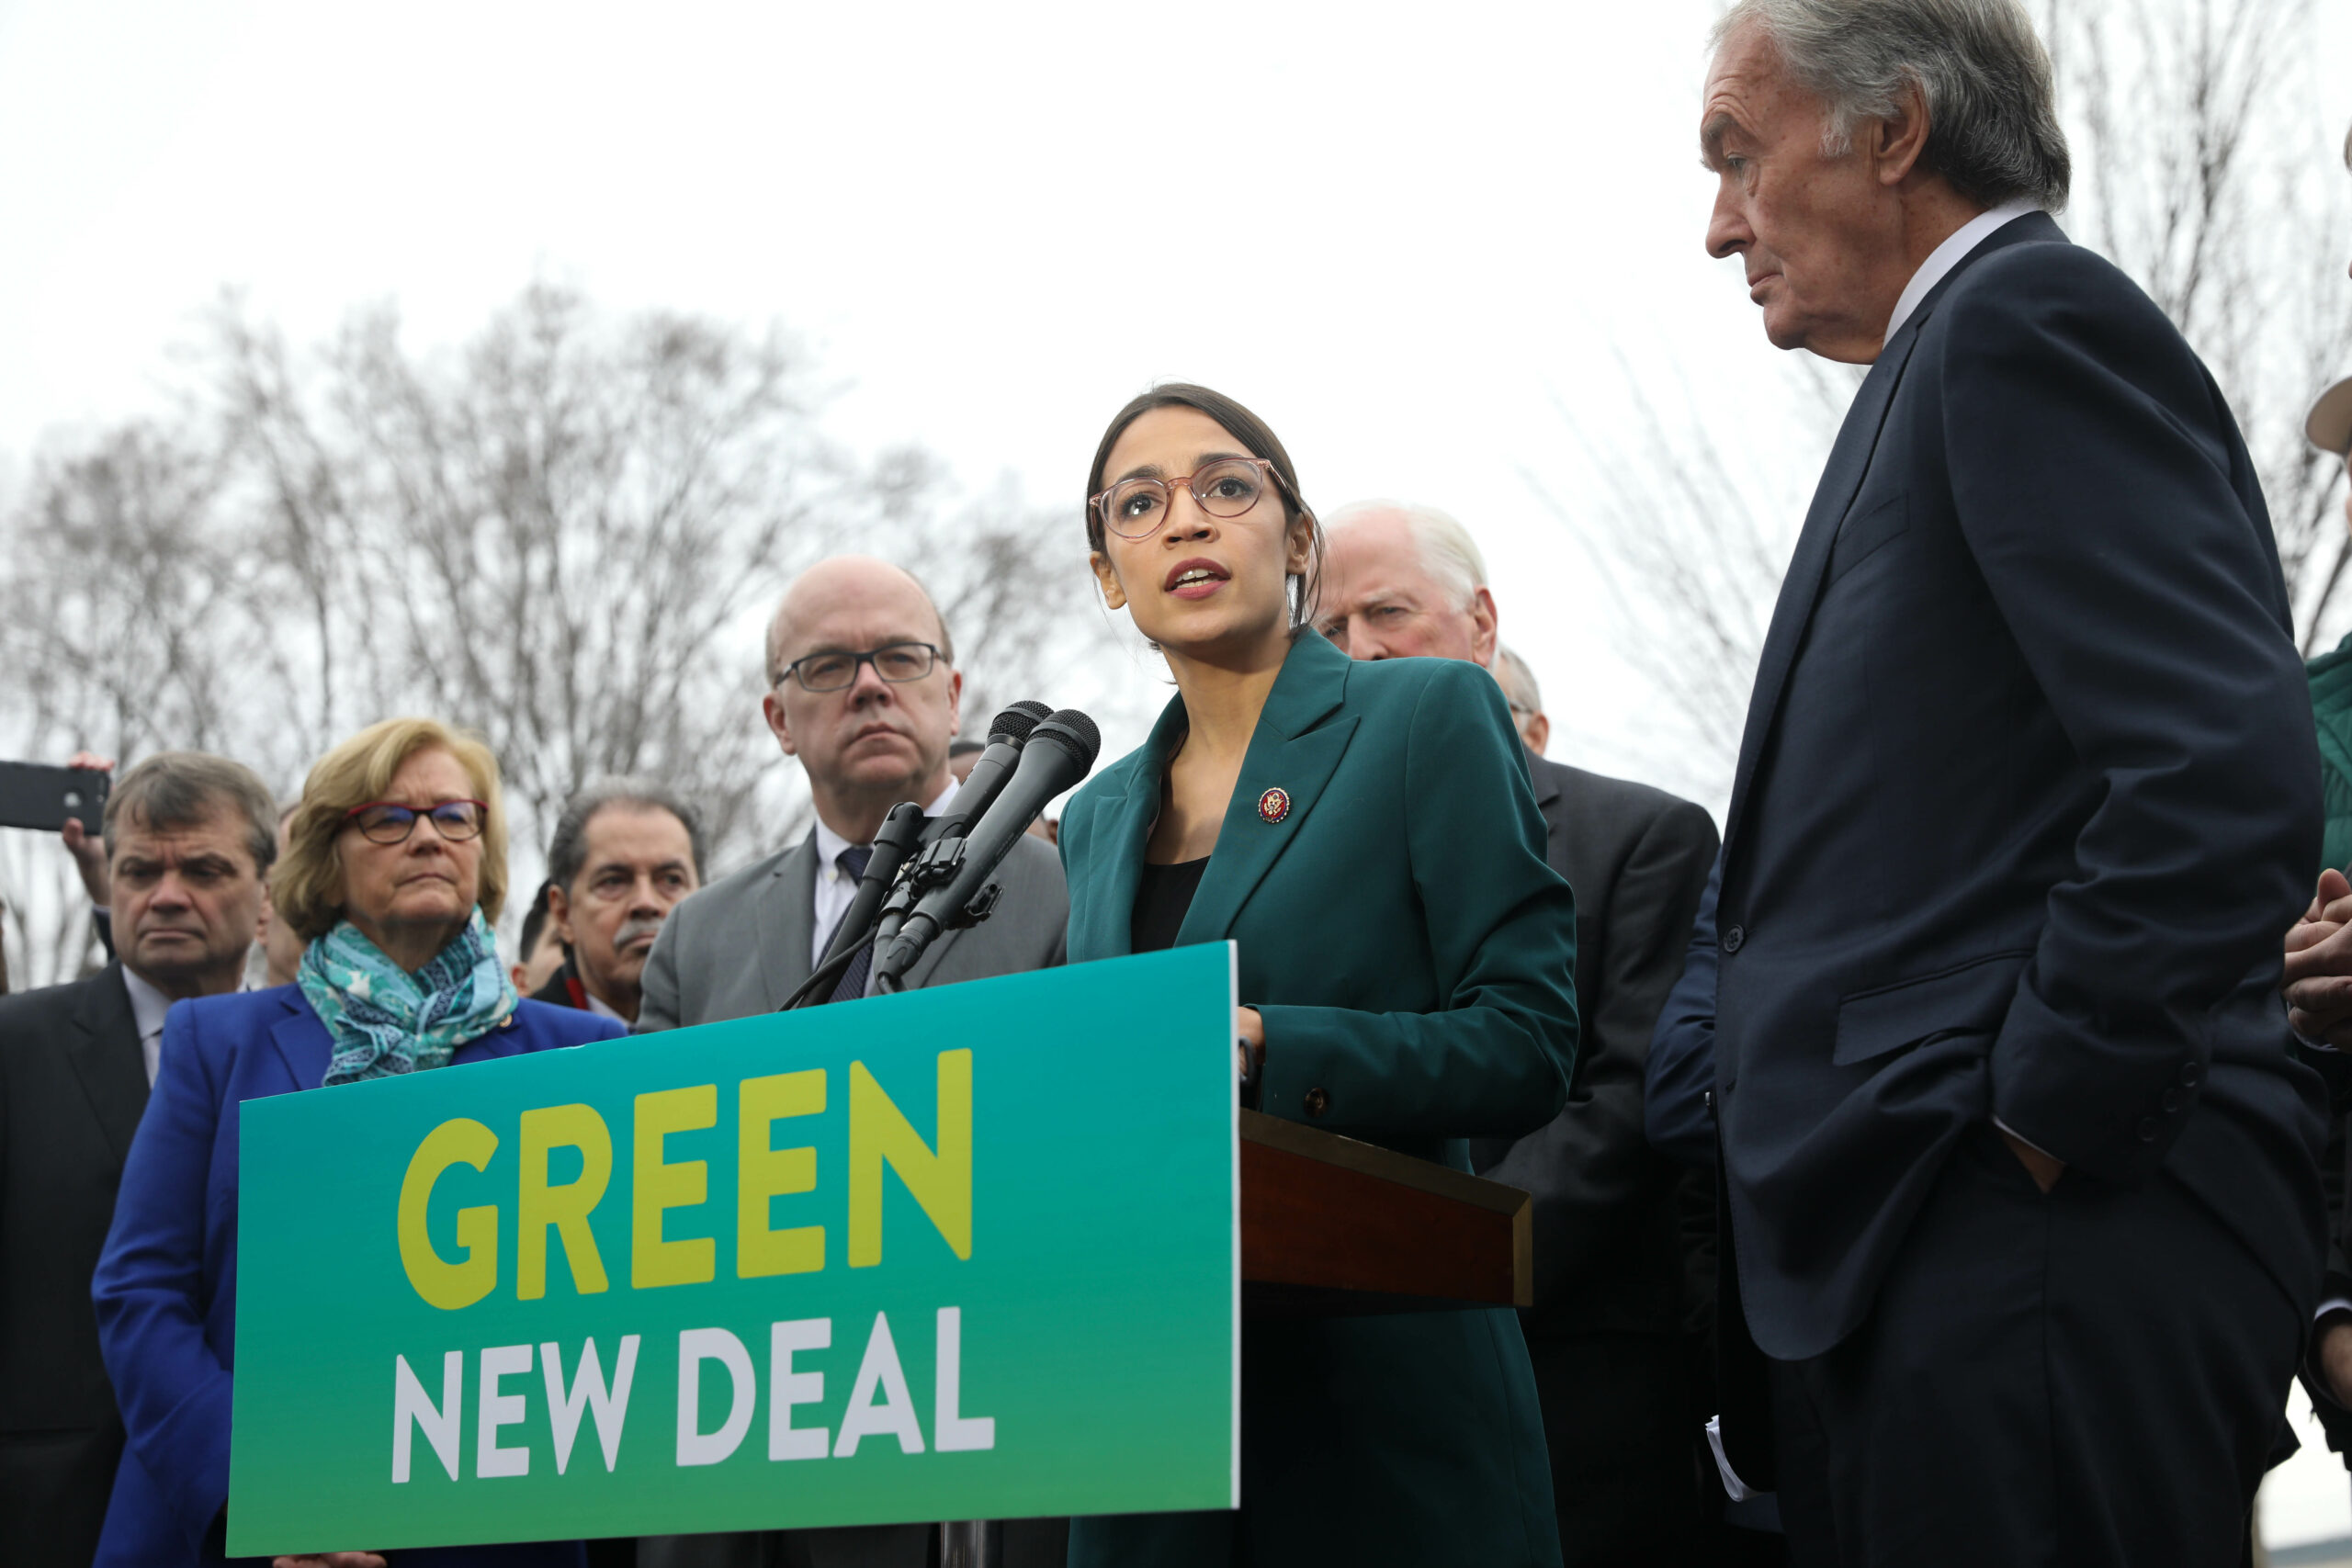 The Green New Deal is more feasible than you think